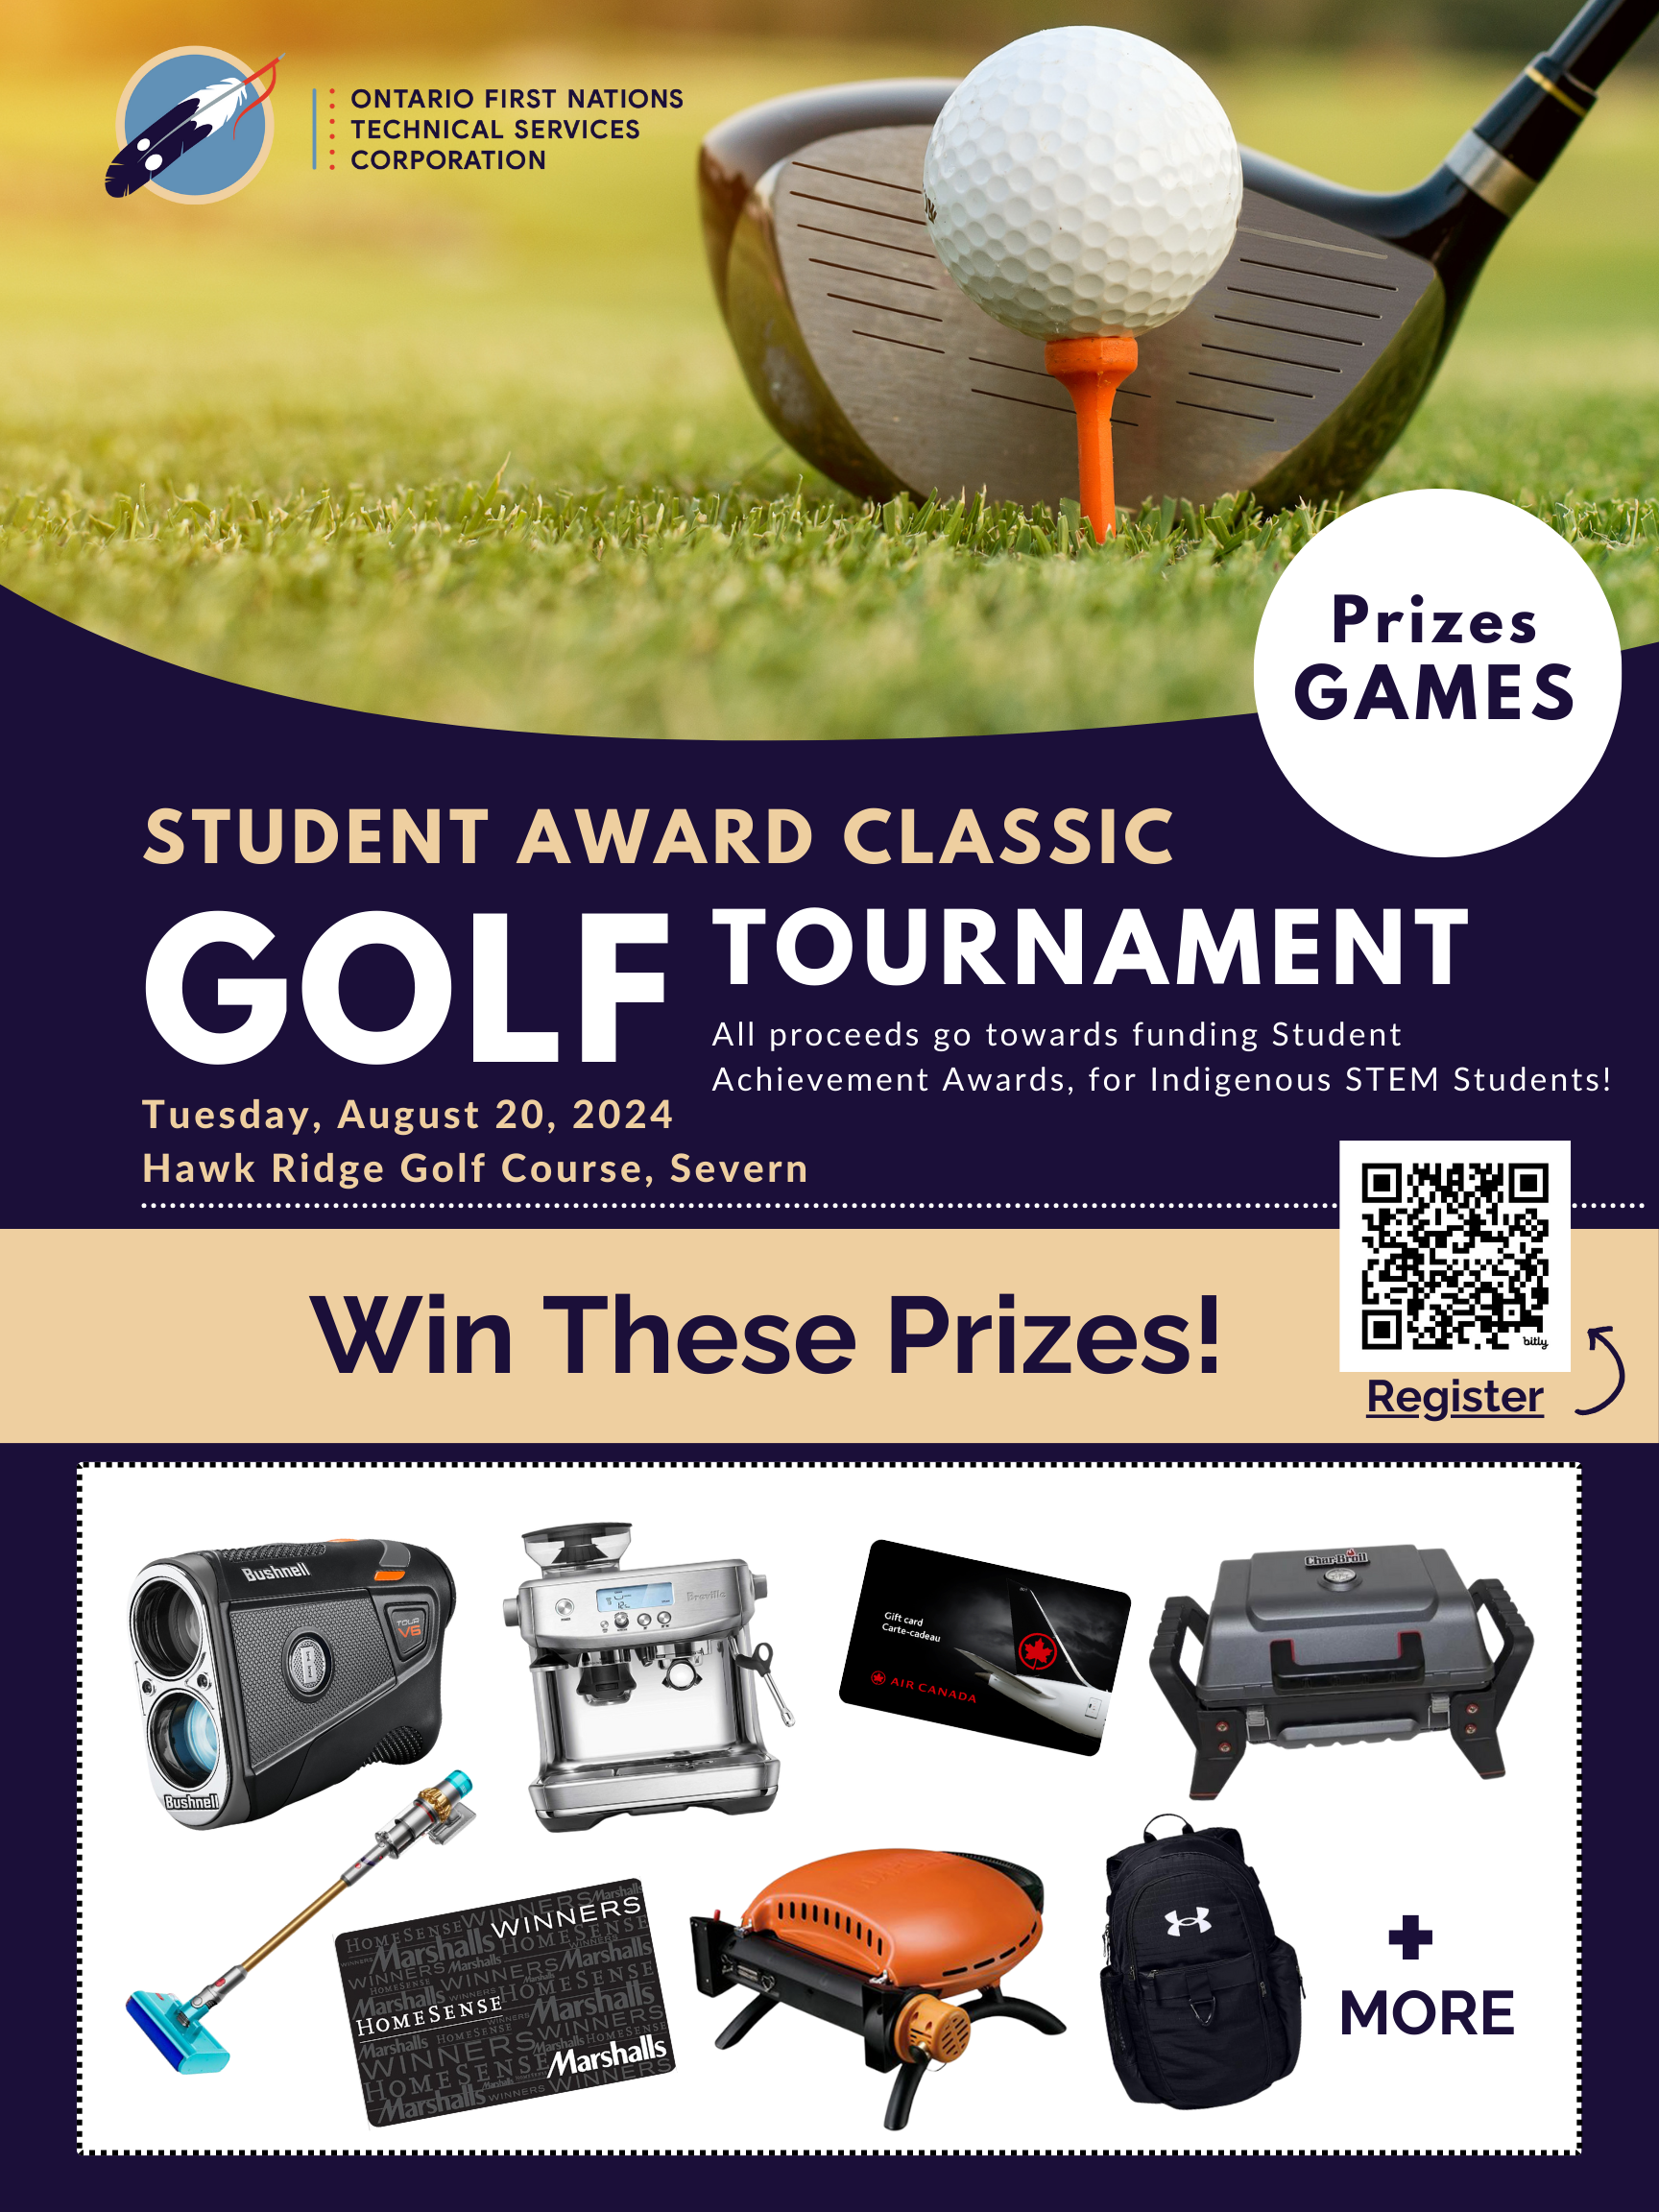 A poster for the golf tournament showing the many prizes that can be won, such as a grill, breville espresso machine, dyson vacuum and more!